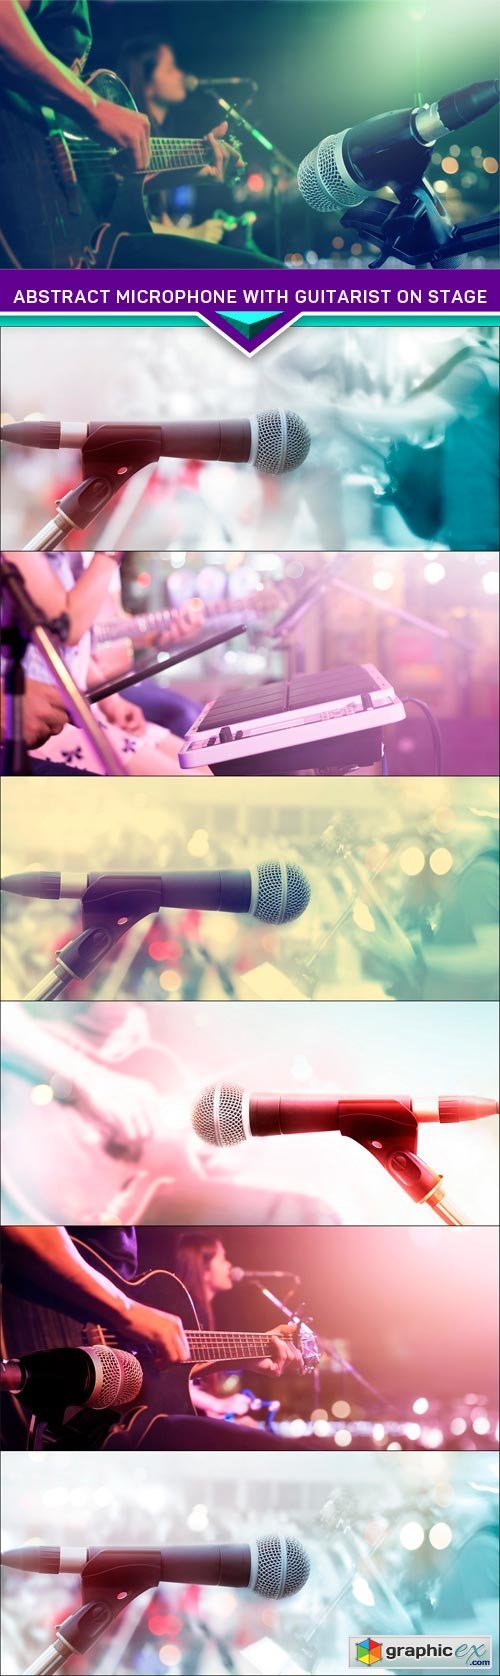 Abstract microphone with guitarist on stage 7X JPEG